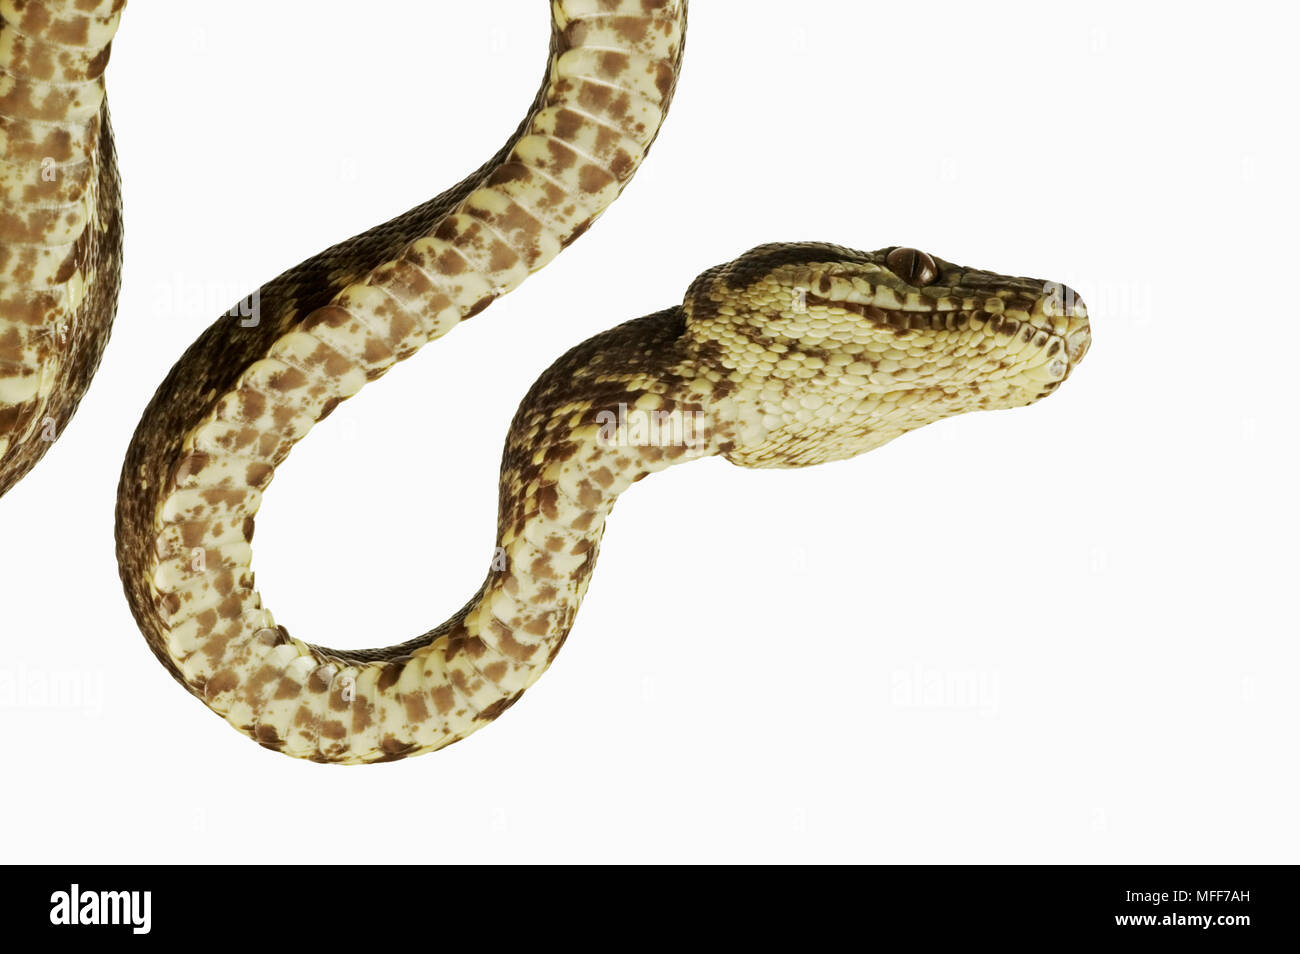 AMAZON TREE BOA Corallus hortulanus View from below.  Distribution: Tropical forests of Central and South America. Stock Photo